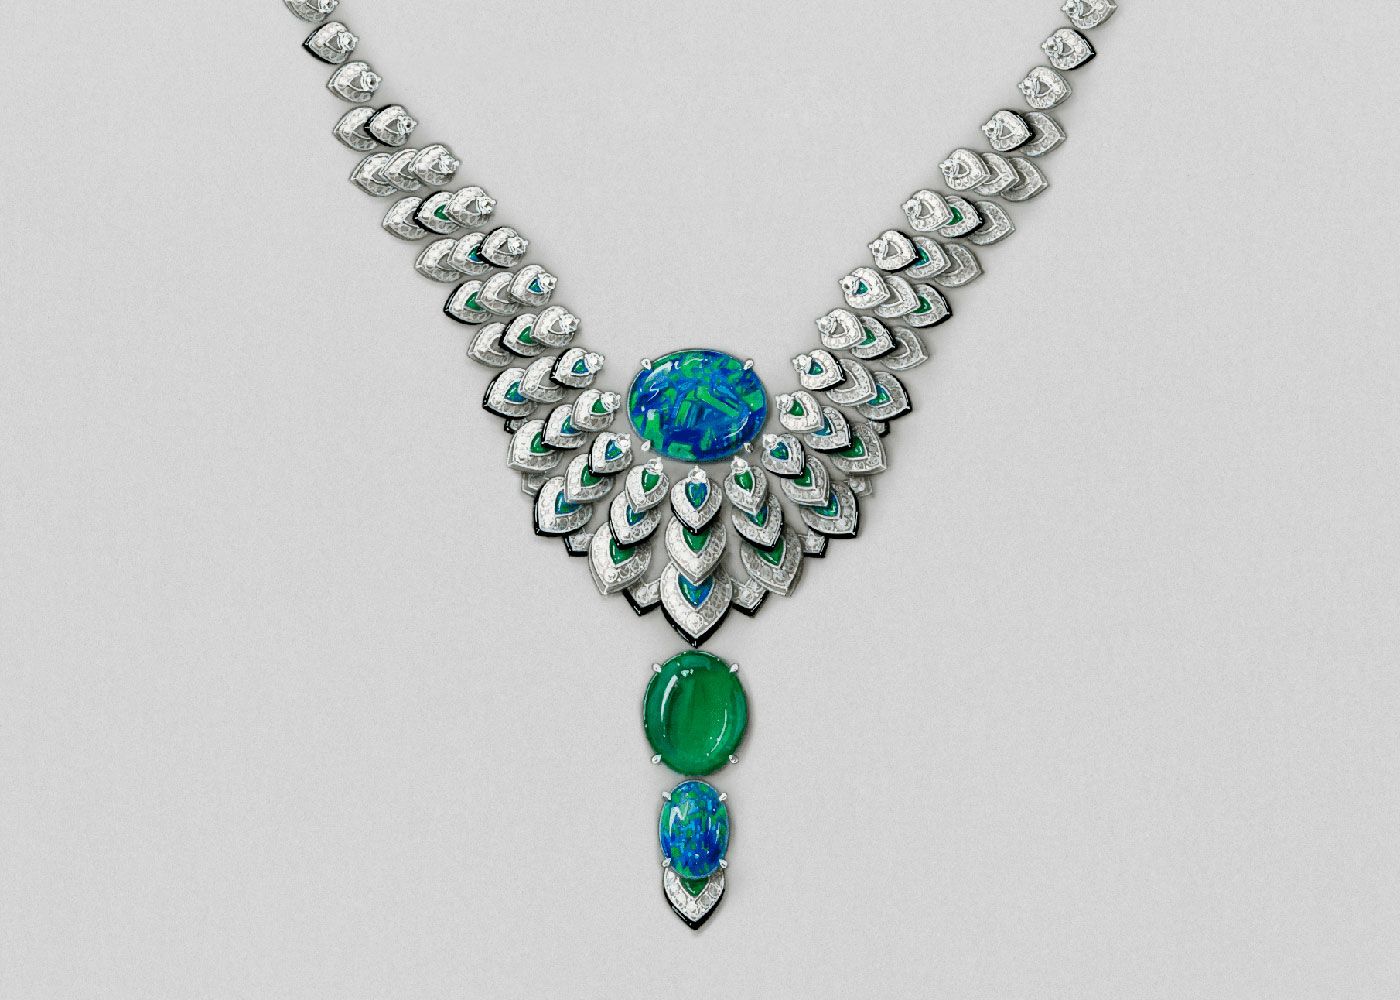 Cartier Ocelle necklace with two black opals of 16.59 and 6.19 carats, a 21.18 carat Zambian emerald cabochon, diamonds and onyx from the Cartier Beautés du Monde Chapter III High Jewellery collection